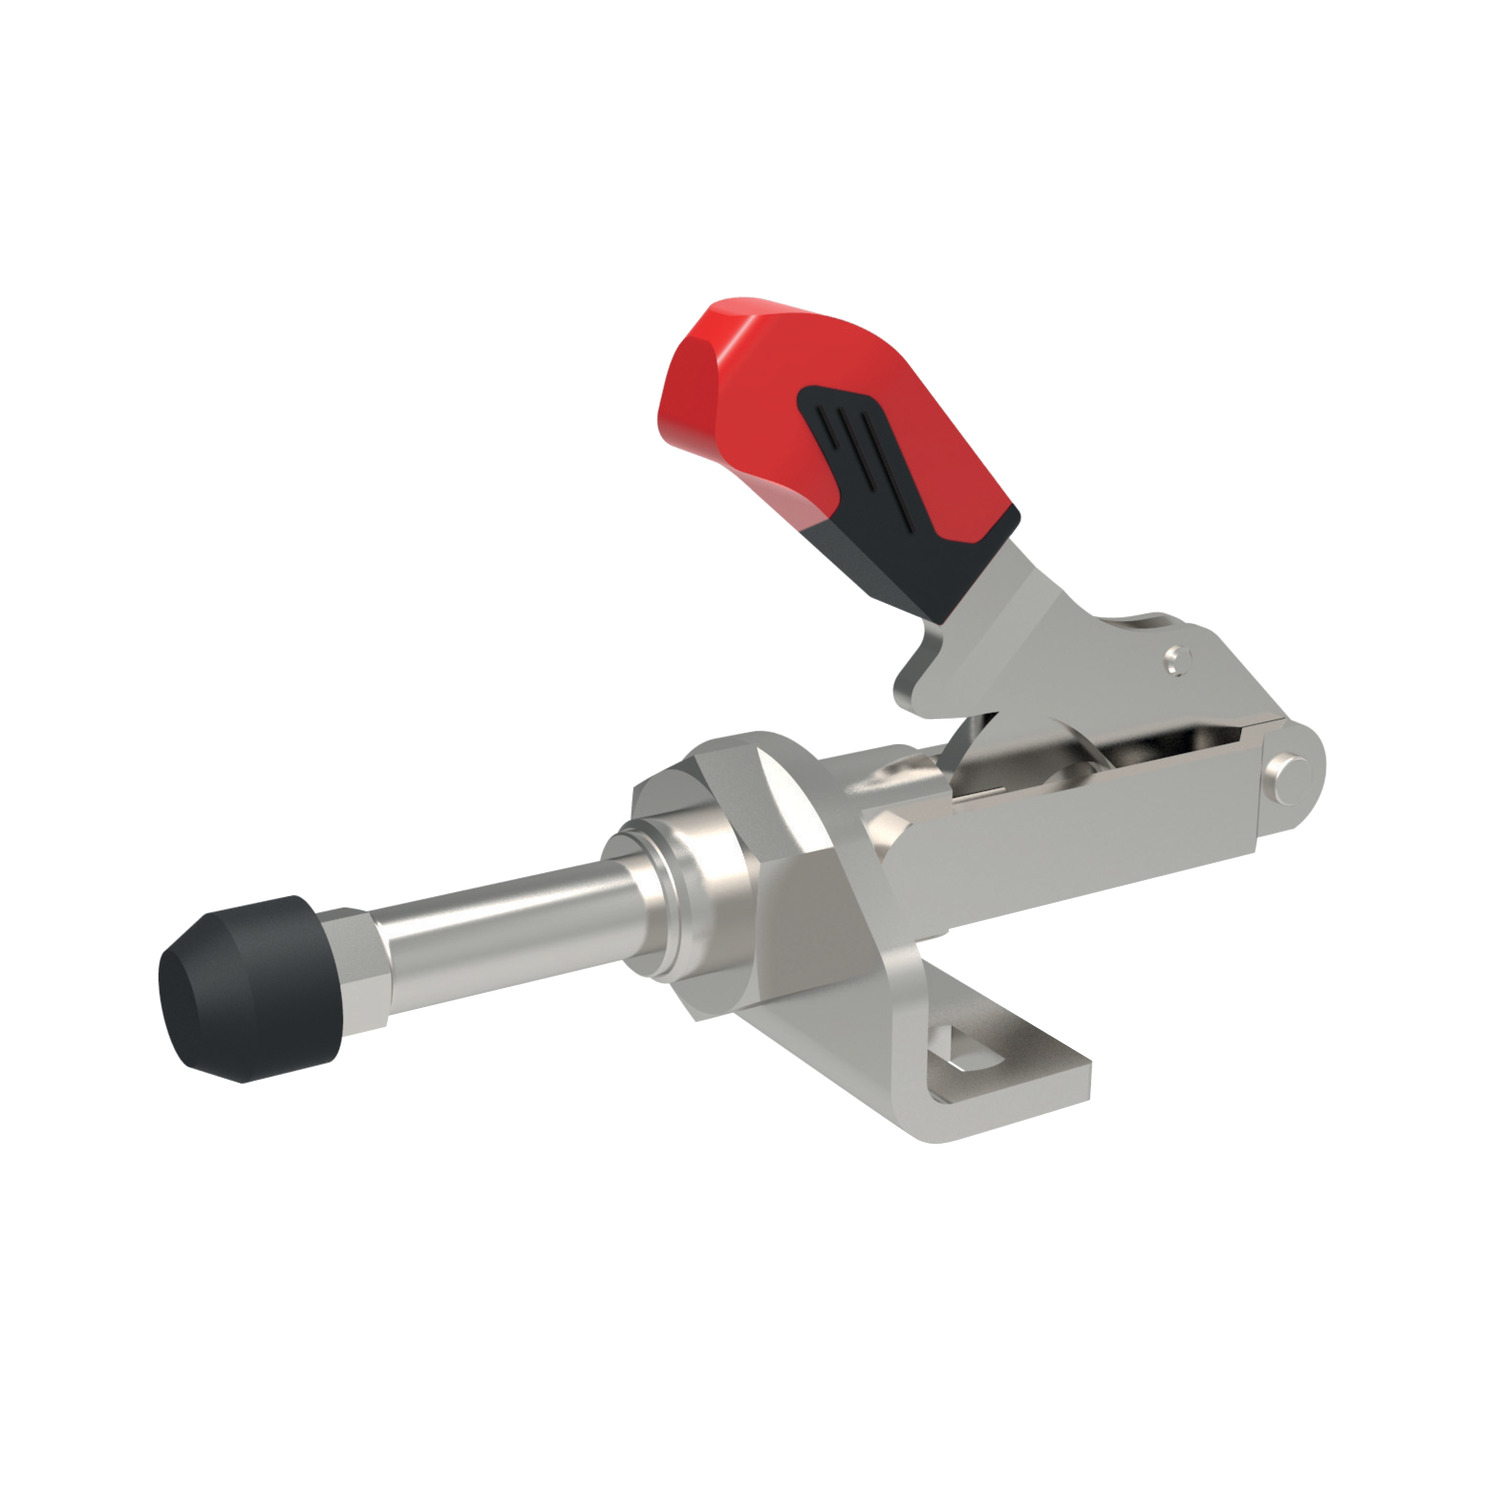 41890 - Push-Pull Toggle Clamps